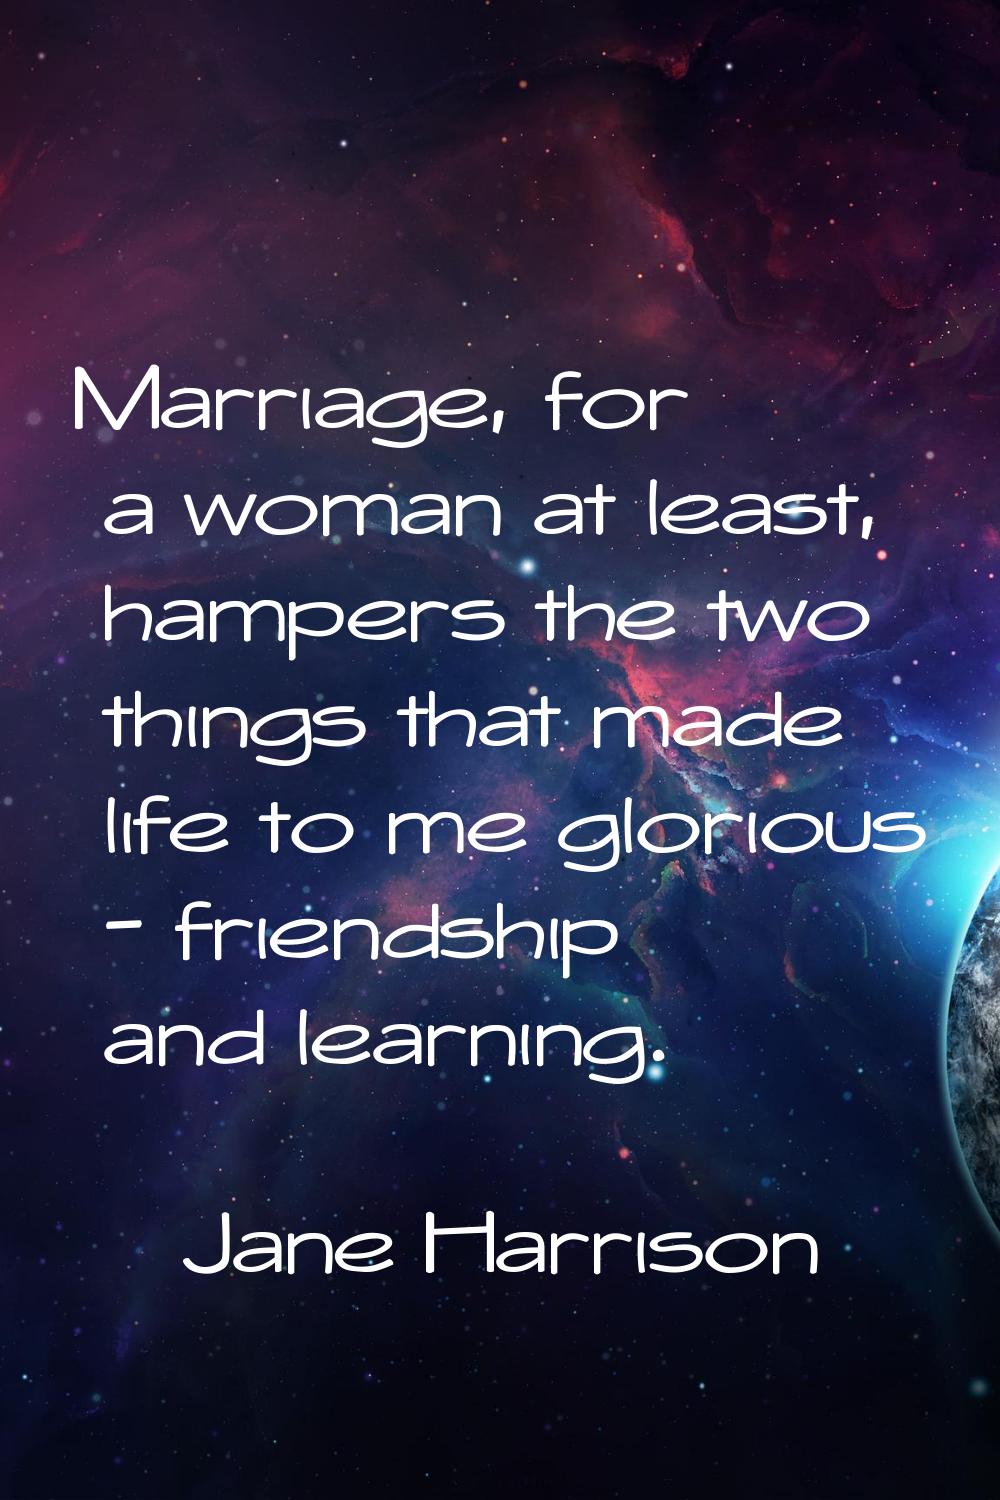 Marriage, for a woman at least, hampers the two things that made life to me glorious - friendship a